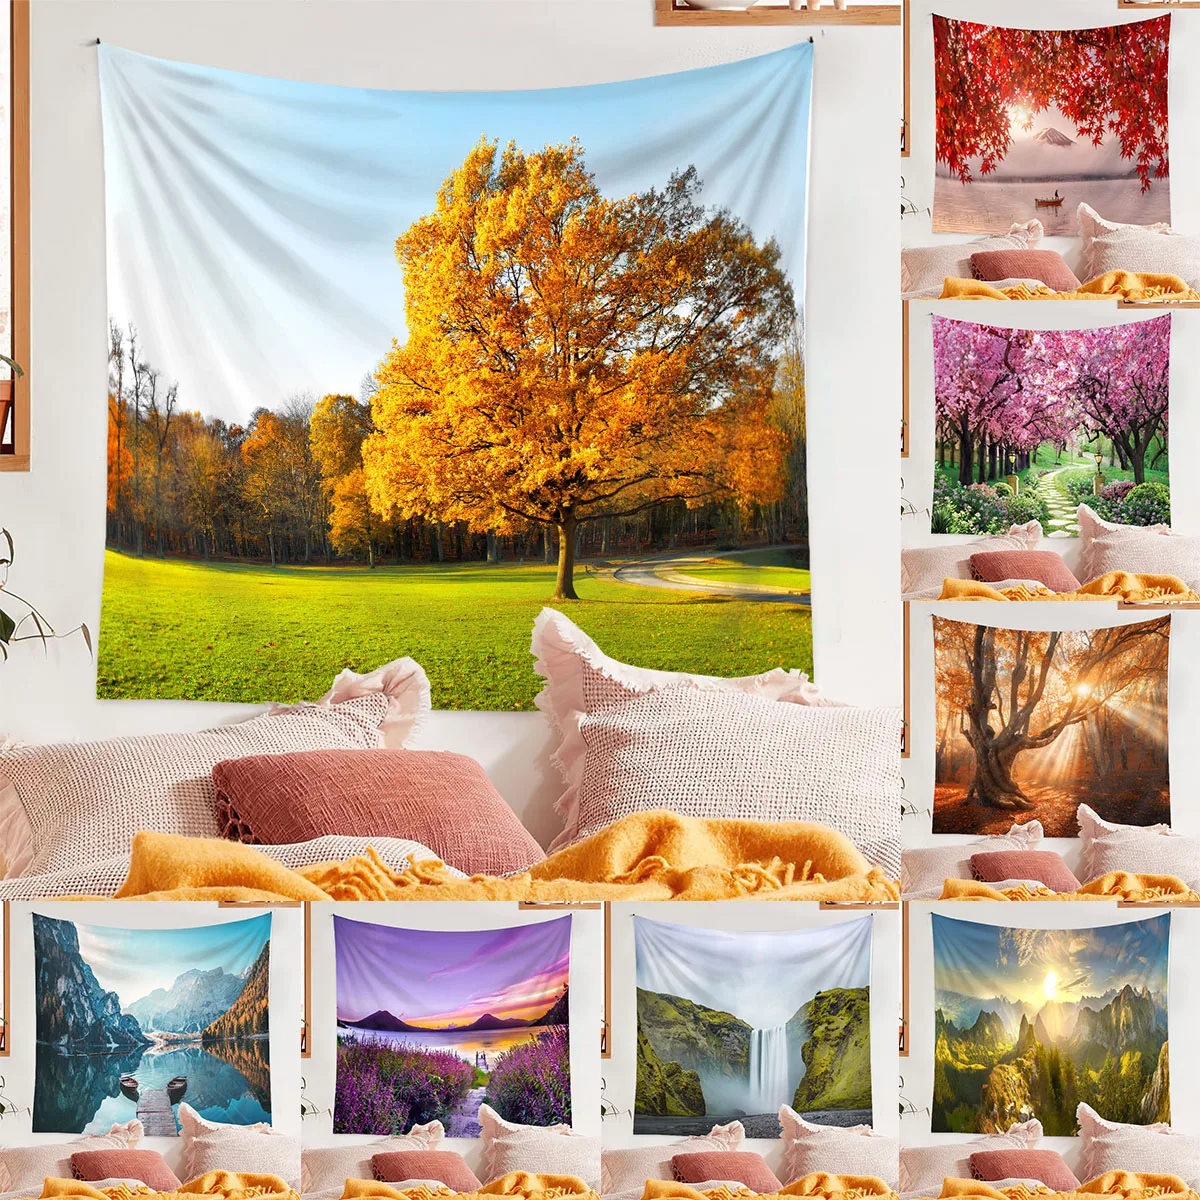 

Beautiful Flower Tree Printed Wall Tapestry Hippie Wall Hanging Tapestry Nature Forest Landscape Tapestries Art Home Decoration